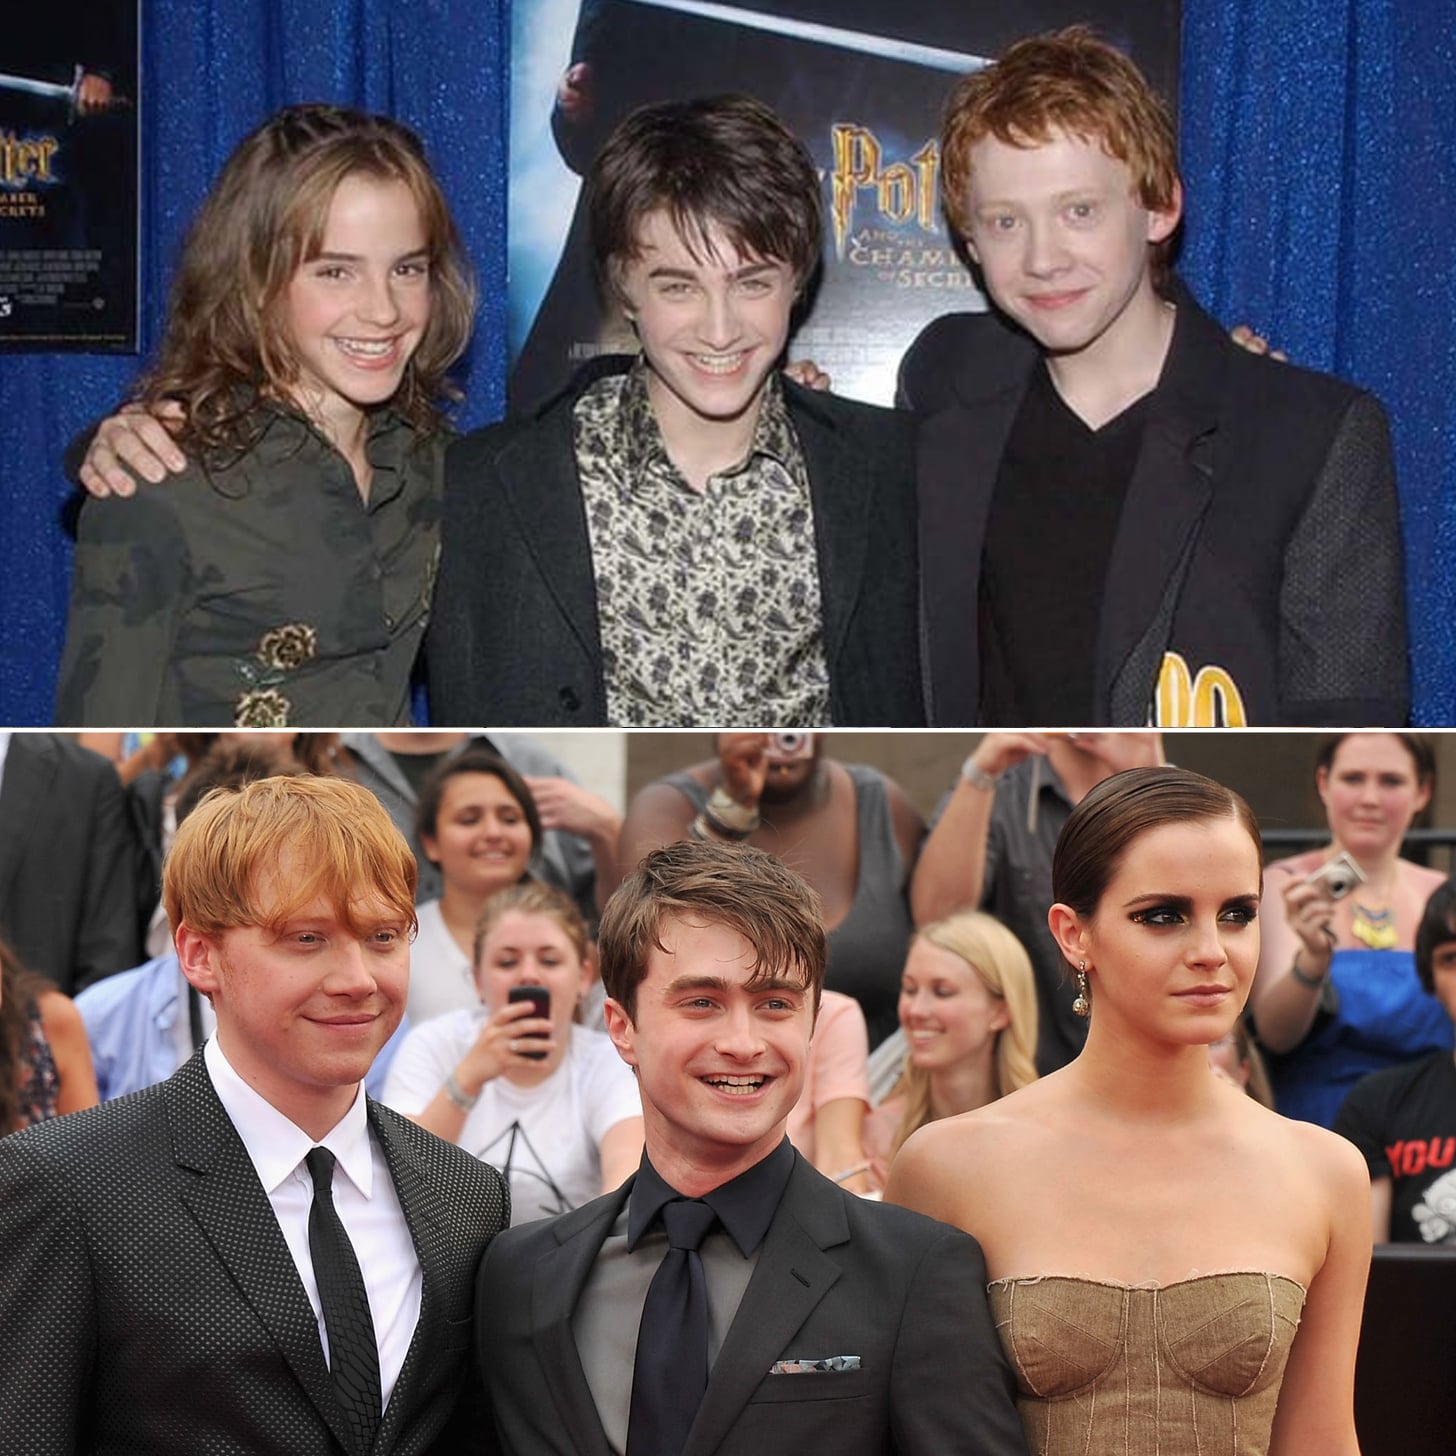 harry potter through the years